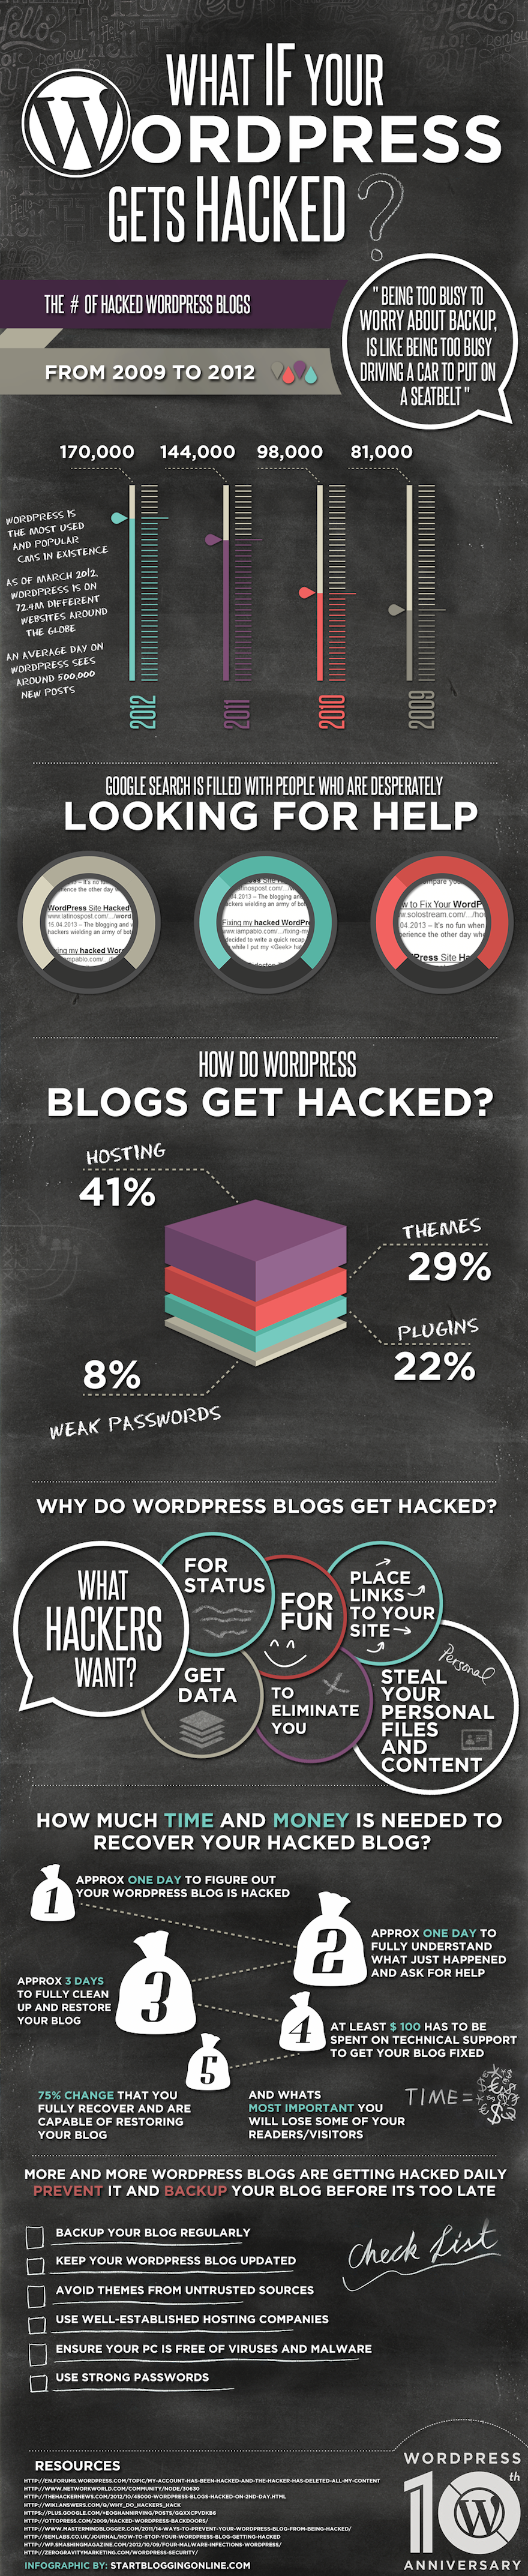 What if Your WordPress Gets Hacked?